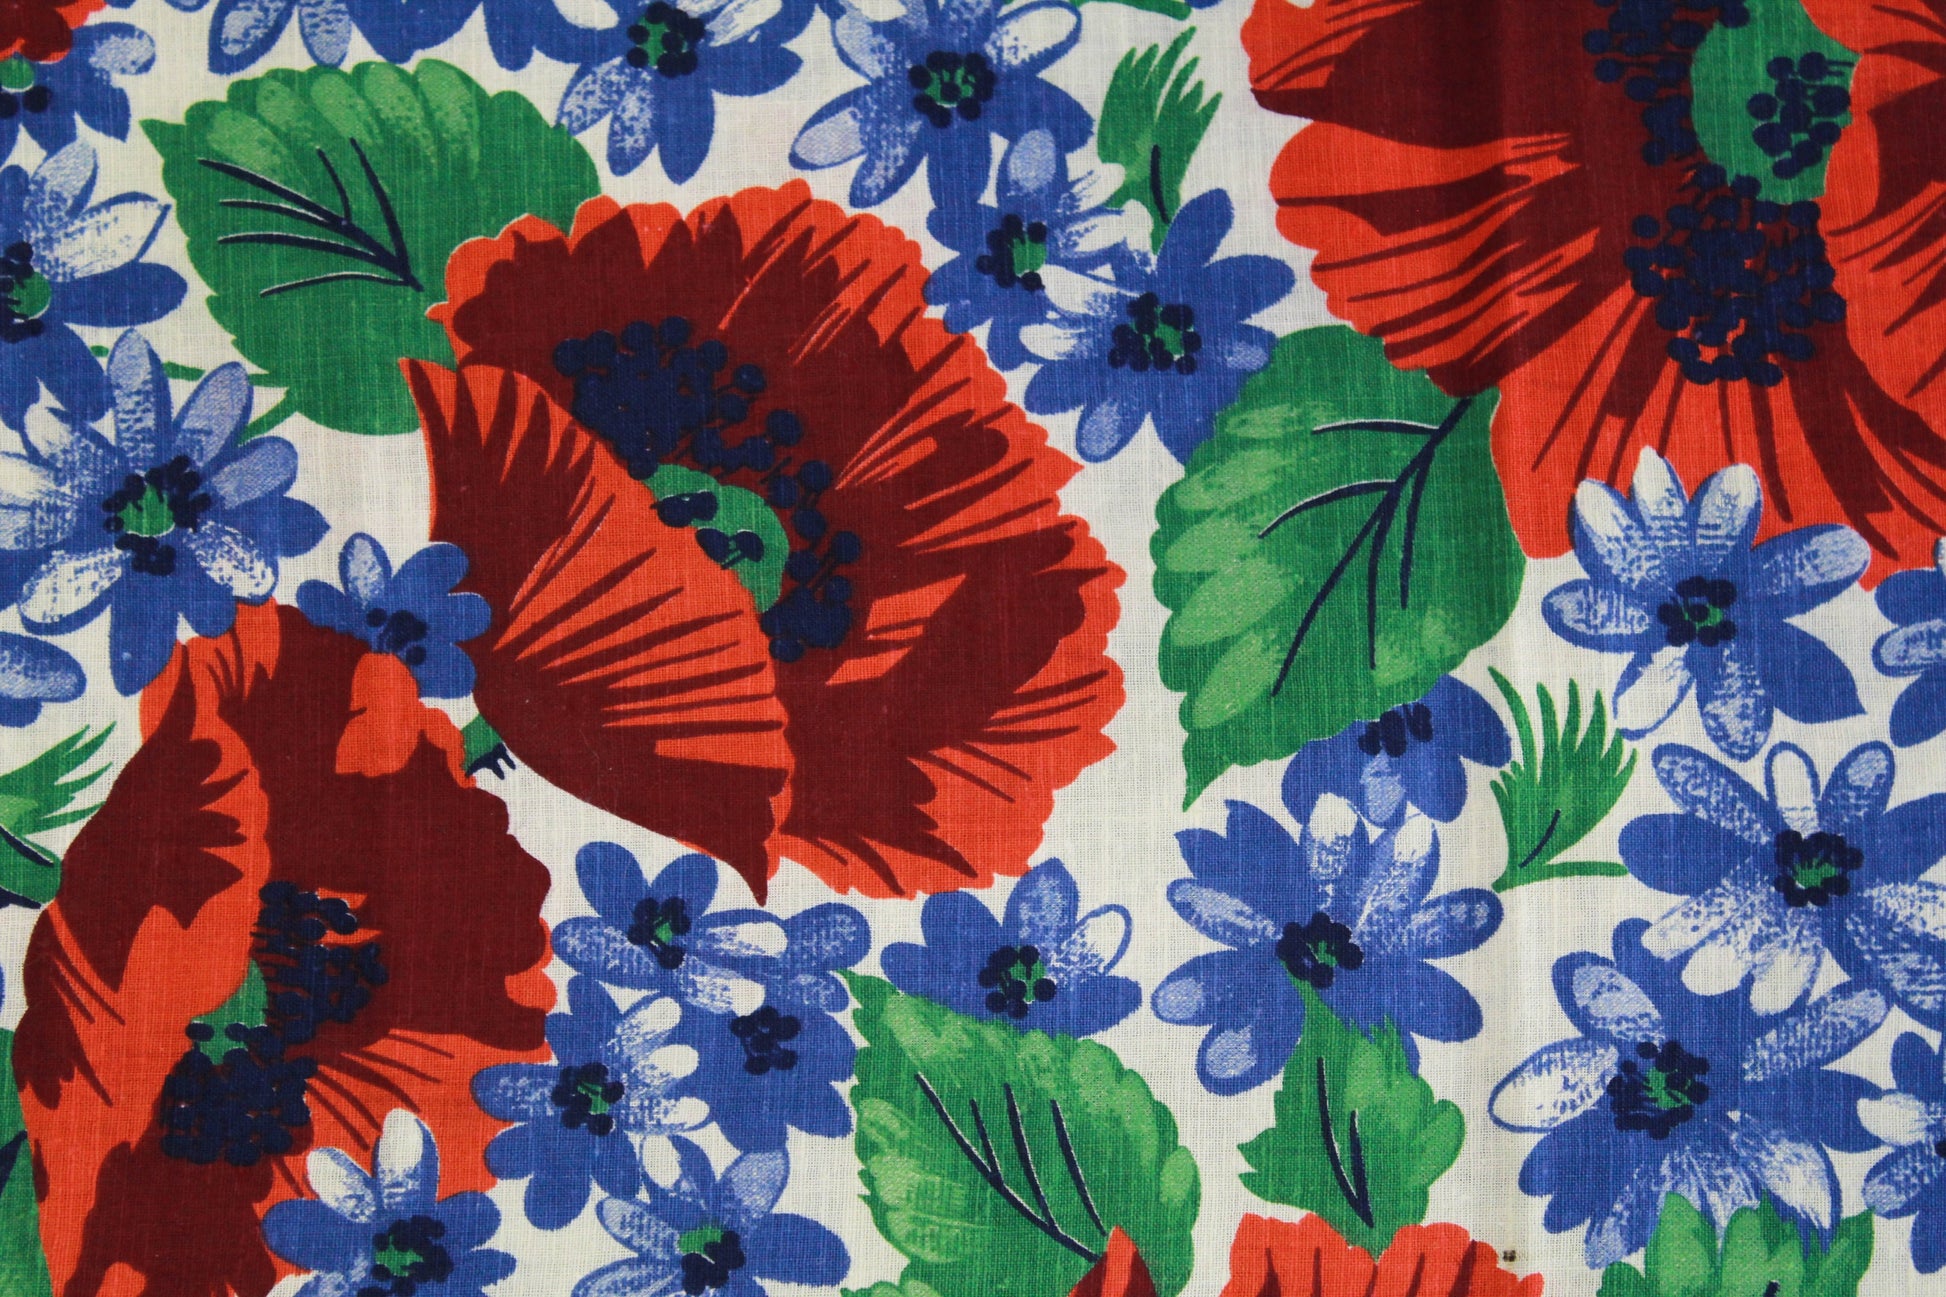 1940s Poppy Print Cotton Fabric, 5 + Yards, Floral Print Sewing